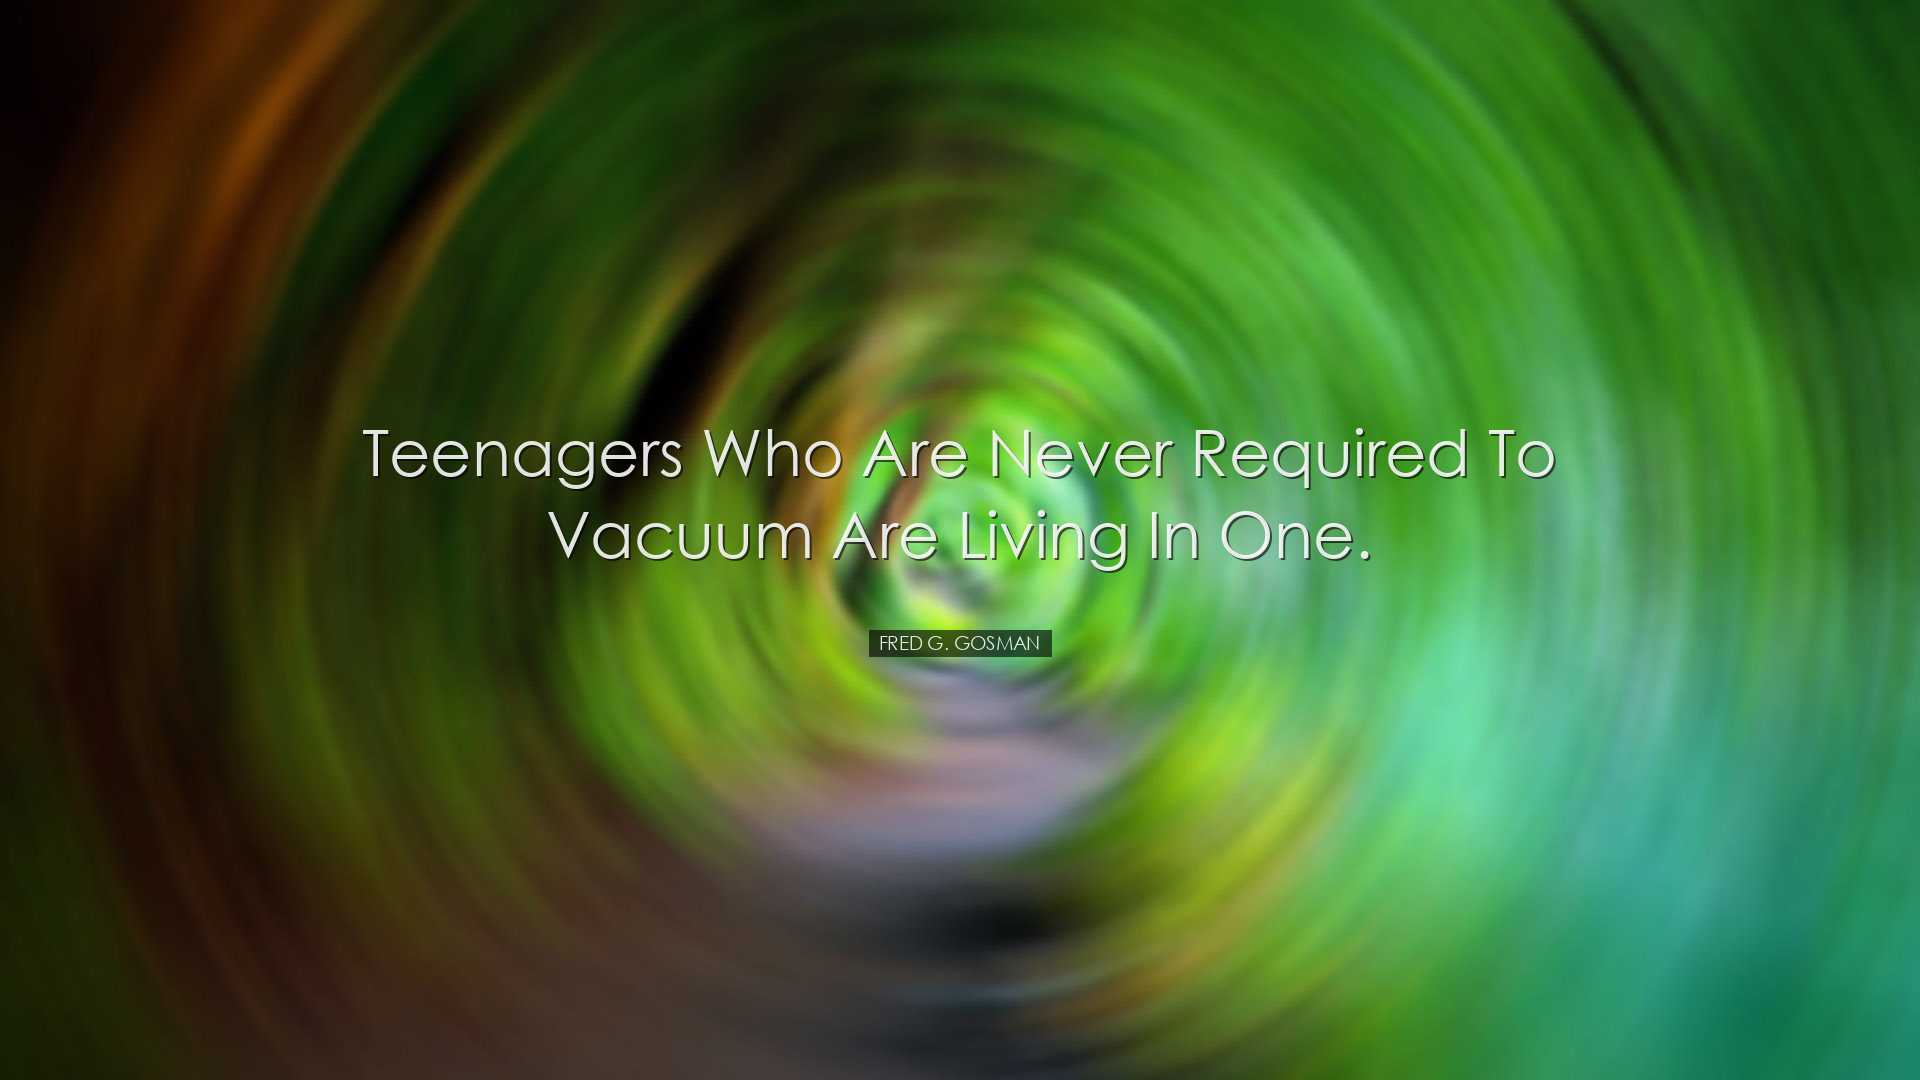 Teenagers who are never required to vacuum are living in one. - Fr